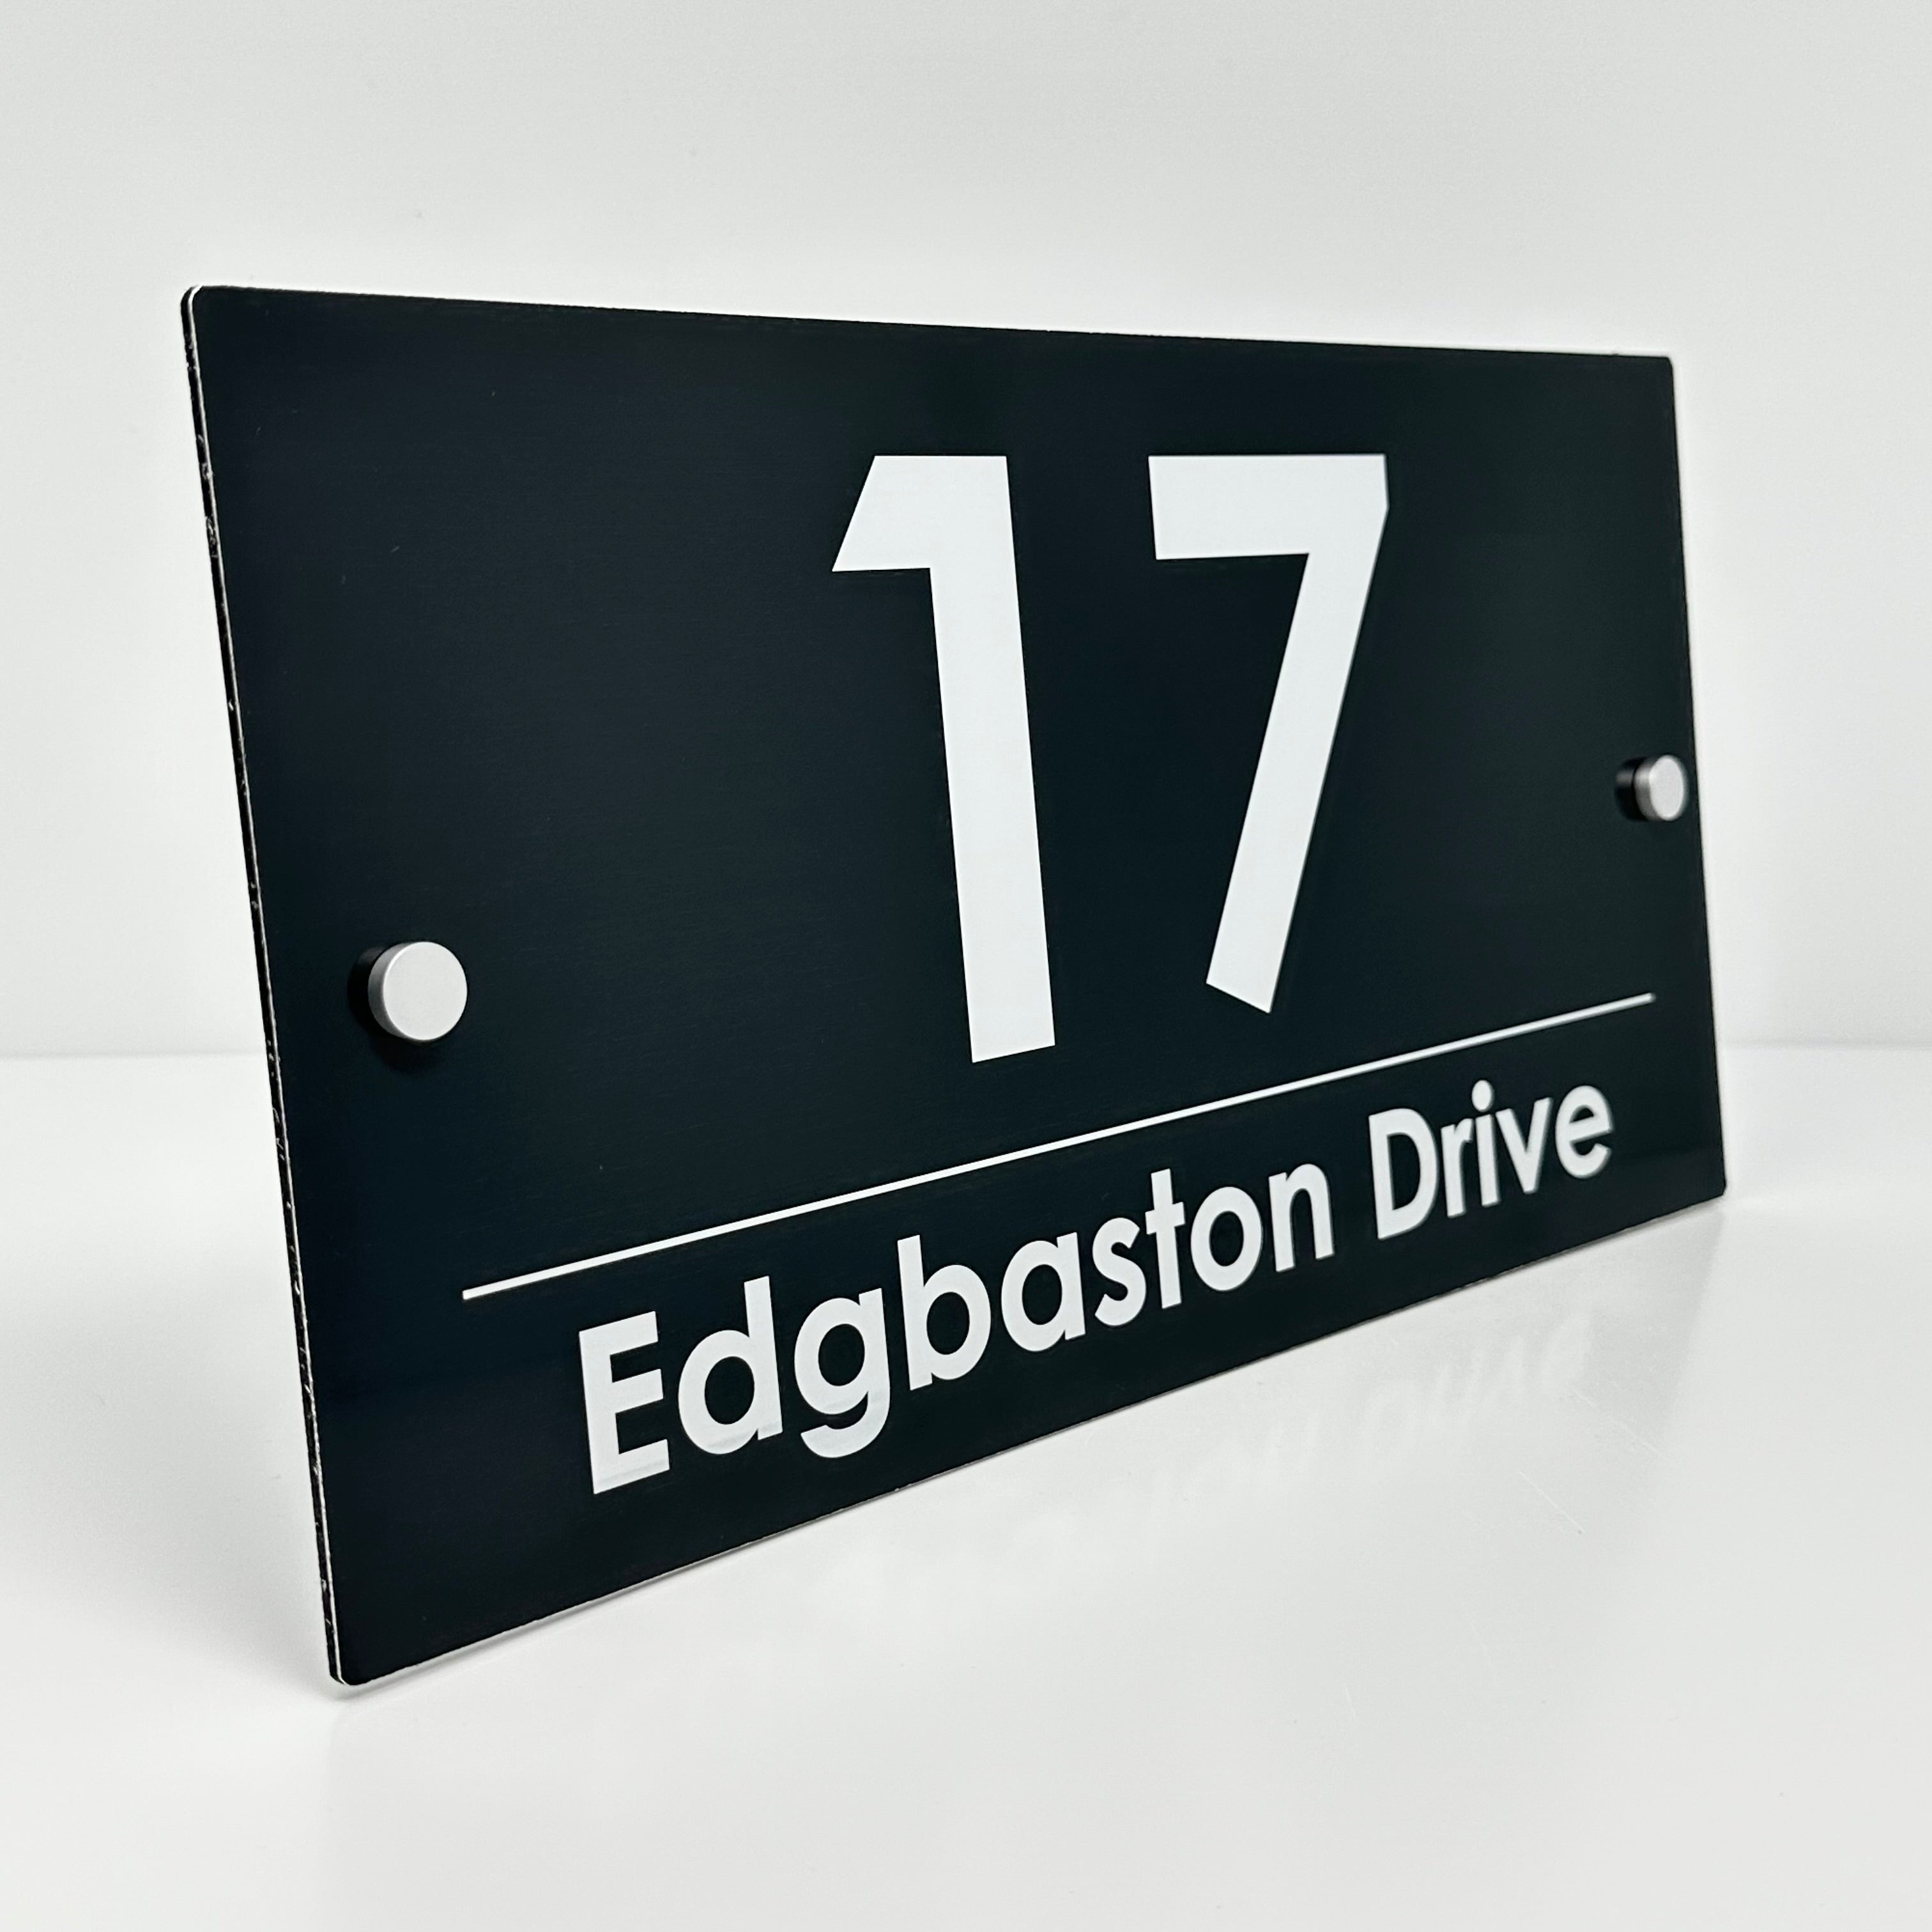 The Edgbaston Modern House Sign with a Brushed Black Panel and Satin Silver Stand Off Fixings ( Size - 35cm x 18cm )